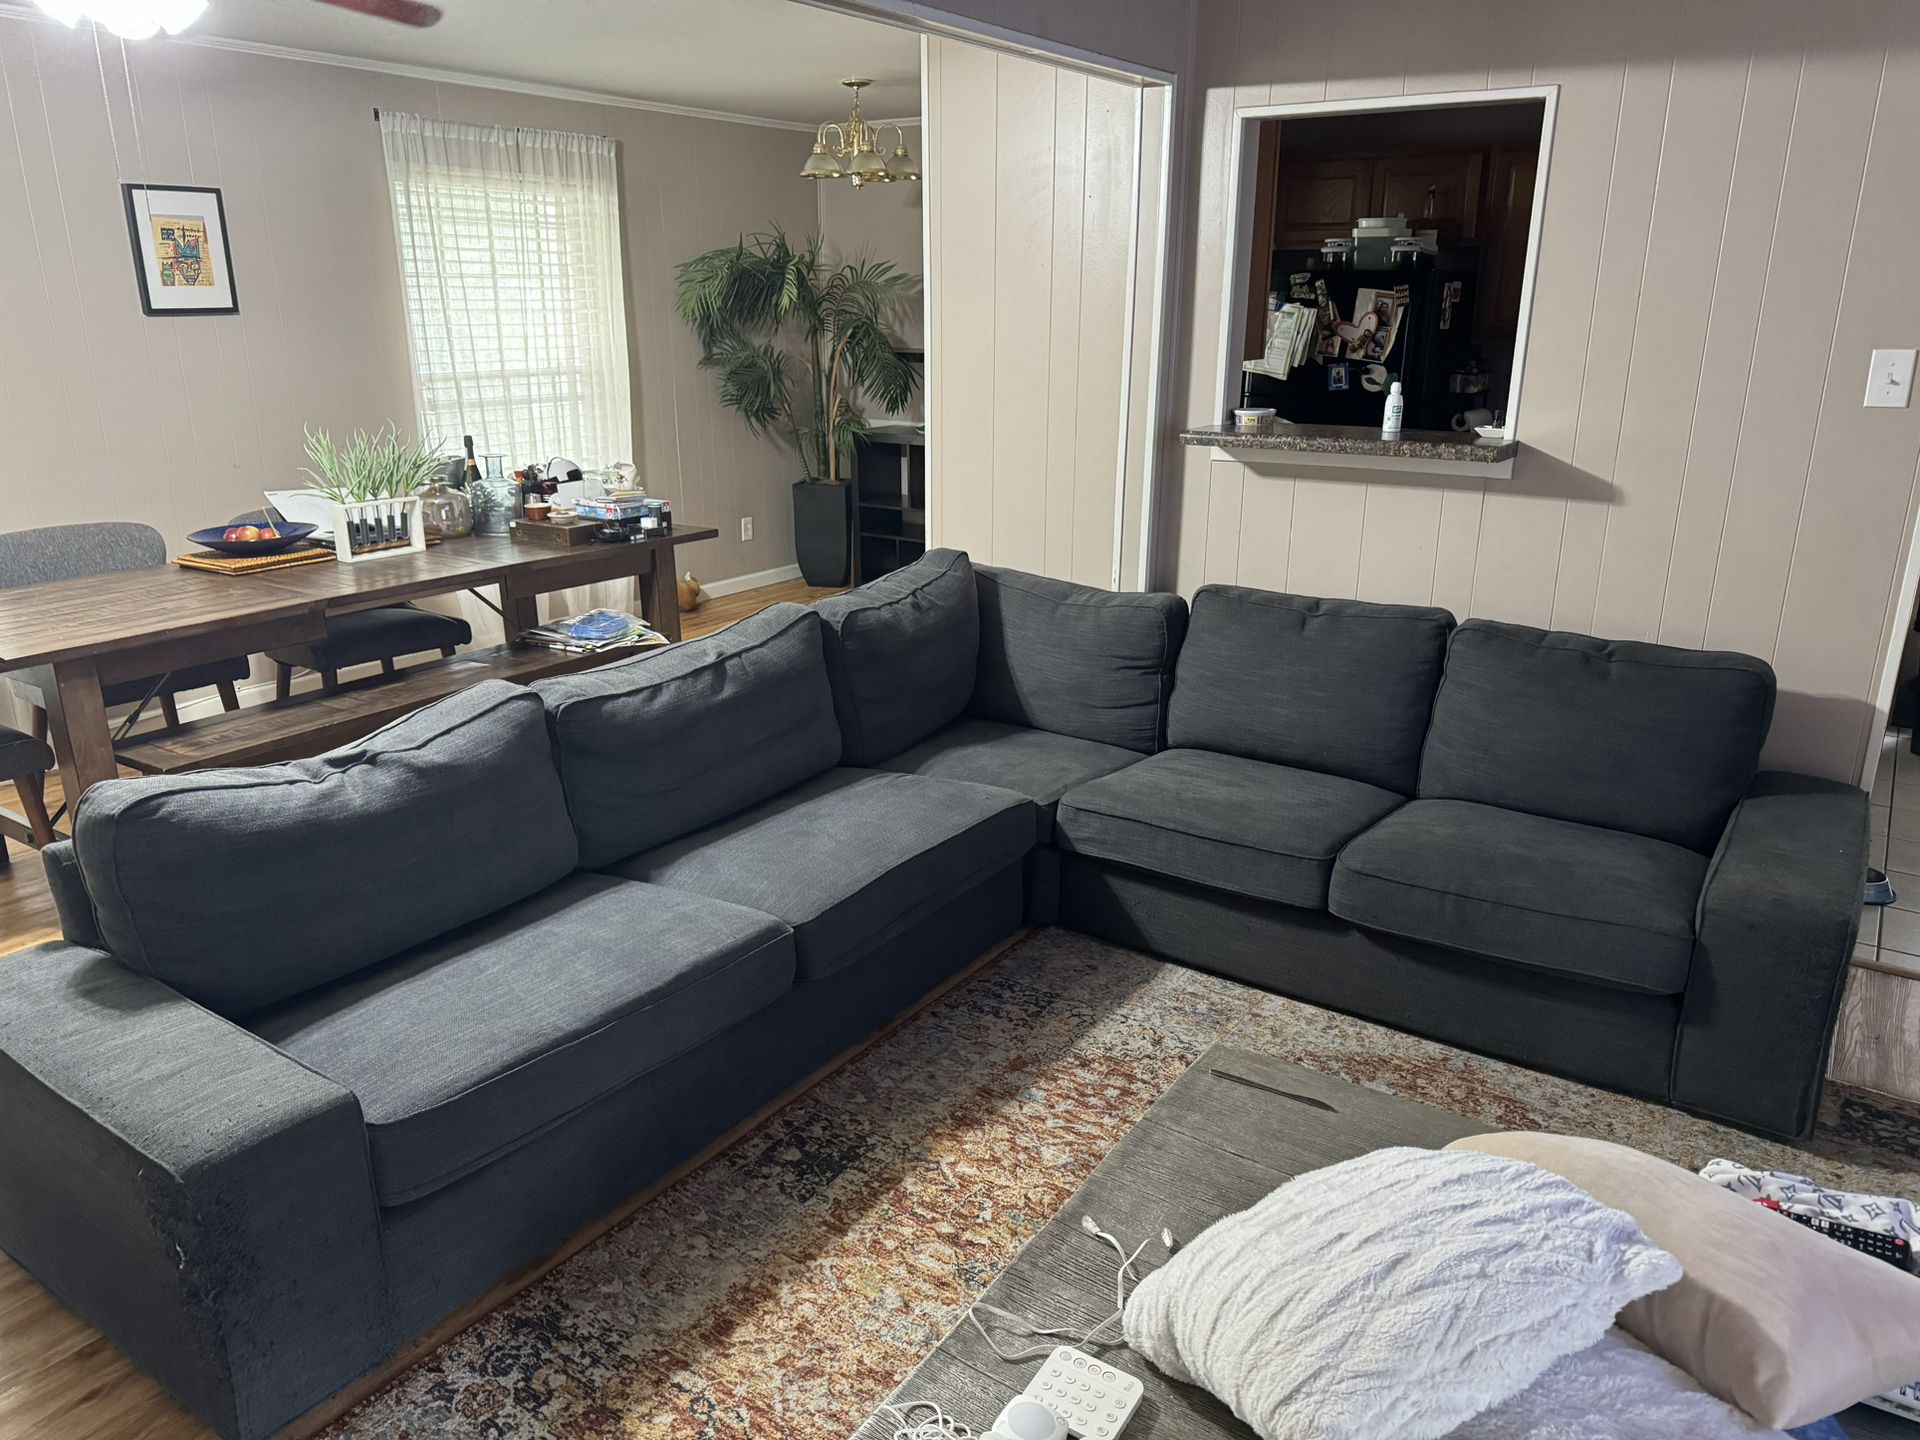 IKEA 2 Piece Sectional For Sale 